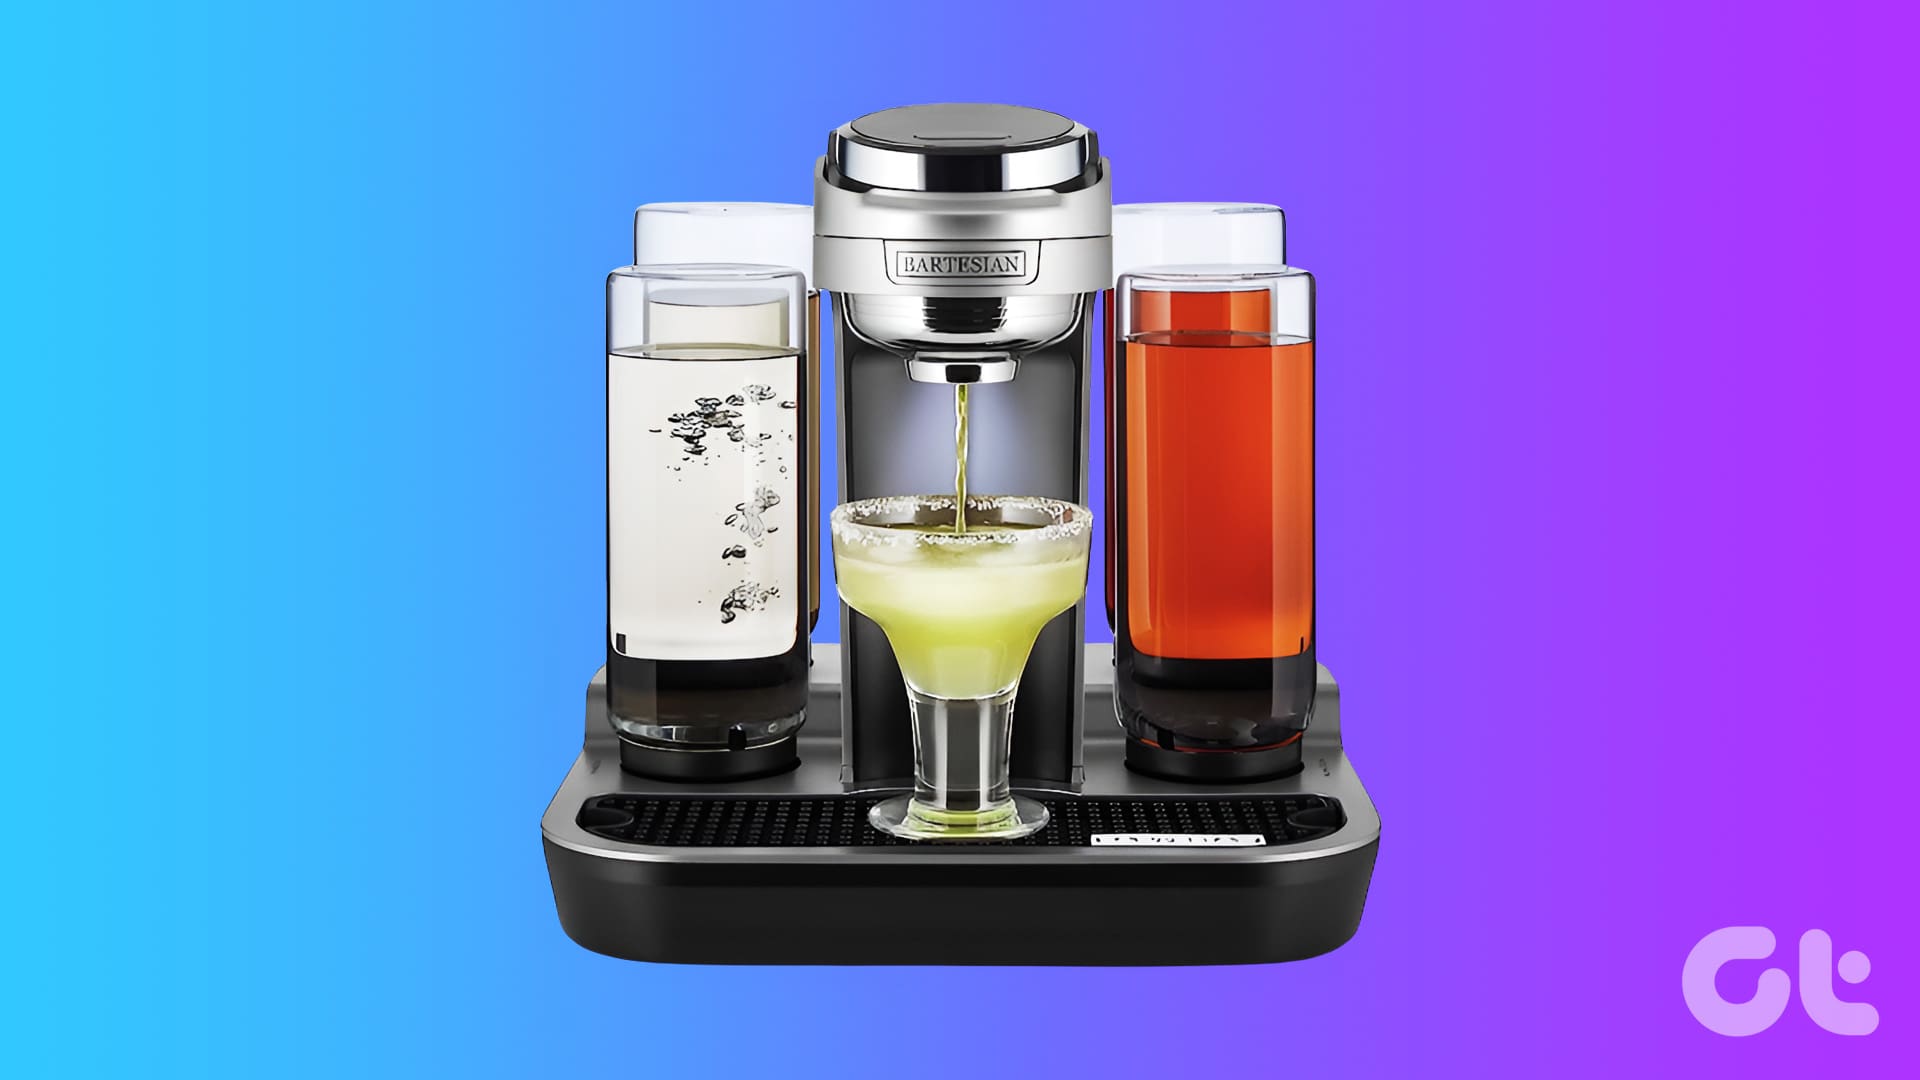 How difficult is it to clean the Bev Black+Decker Cocktail Maker